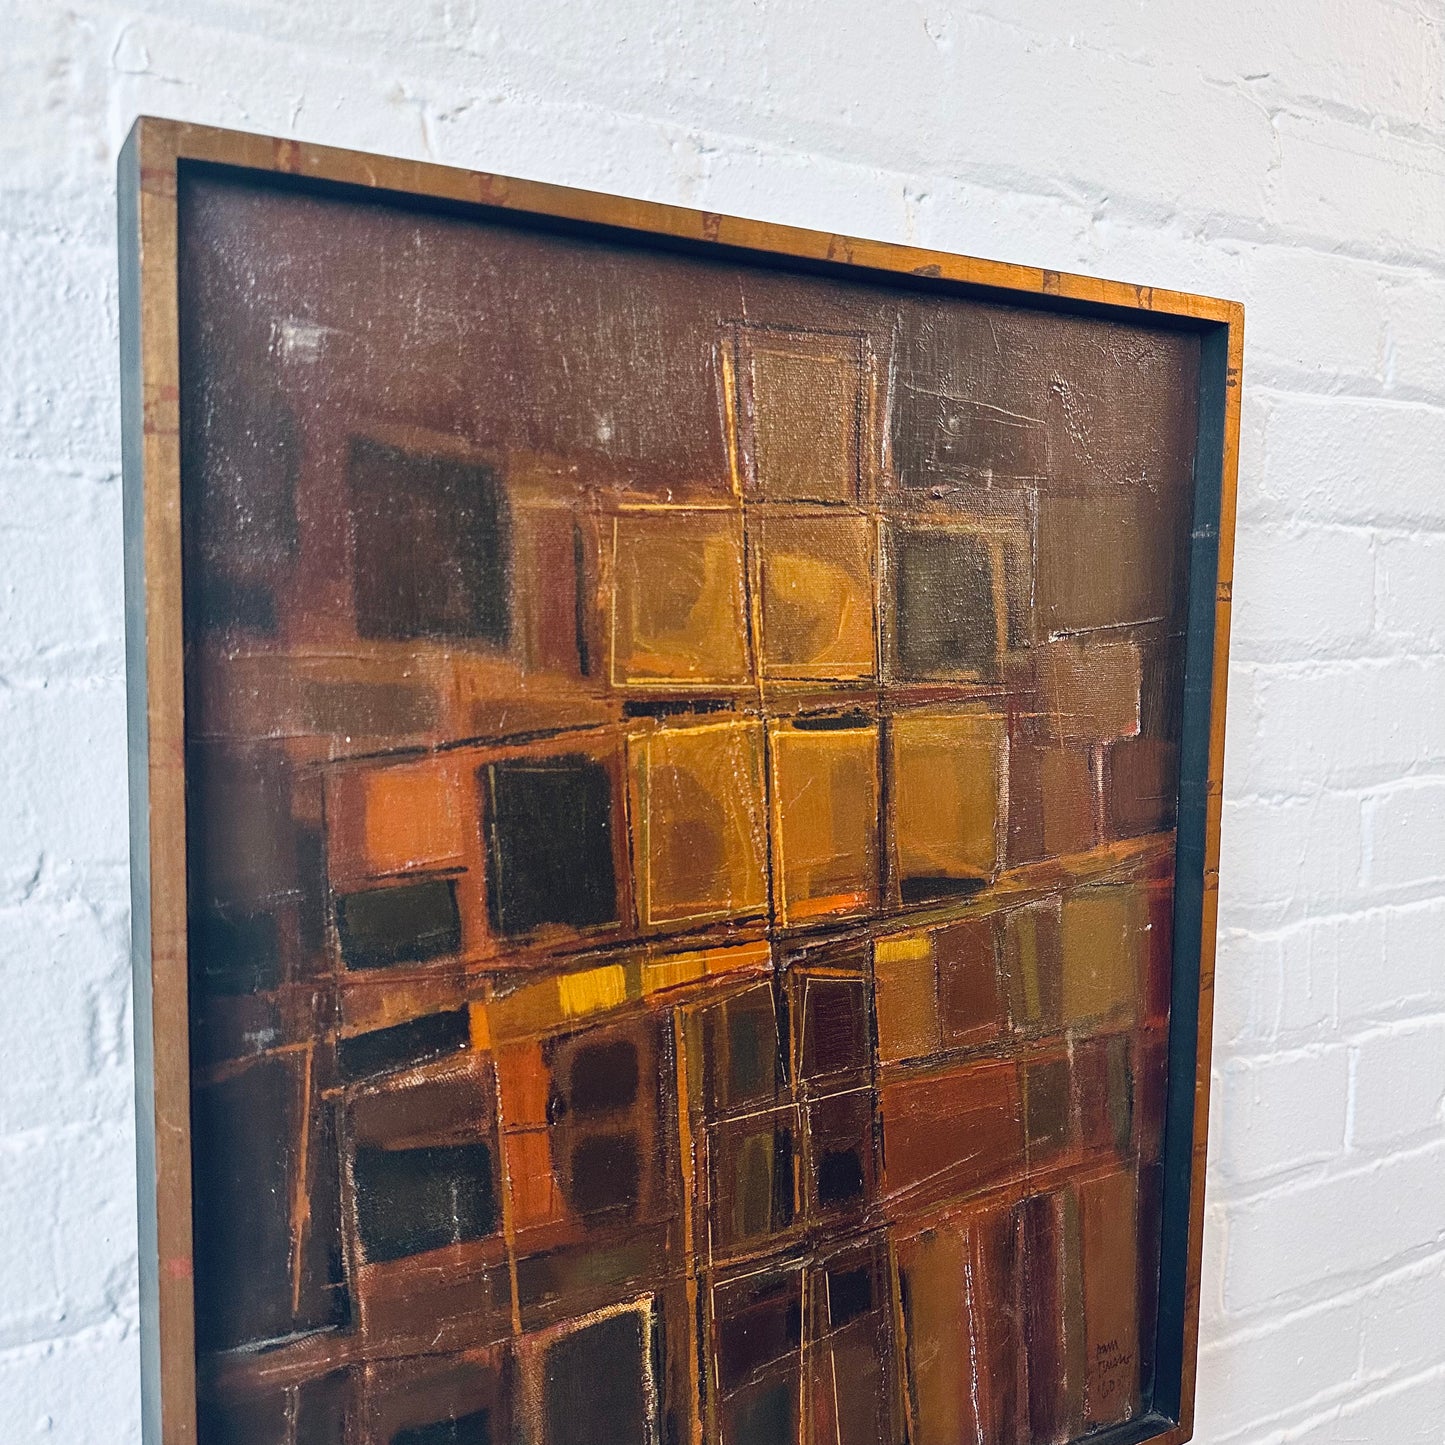 SAM RUSSO (B. 1922) SIGNED ABSTRACT OIL ON CANVAS “STRUCTURE” C.1960